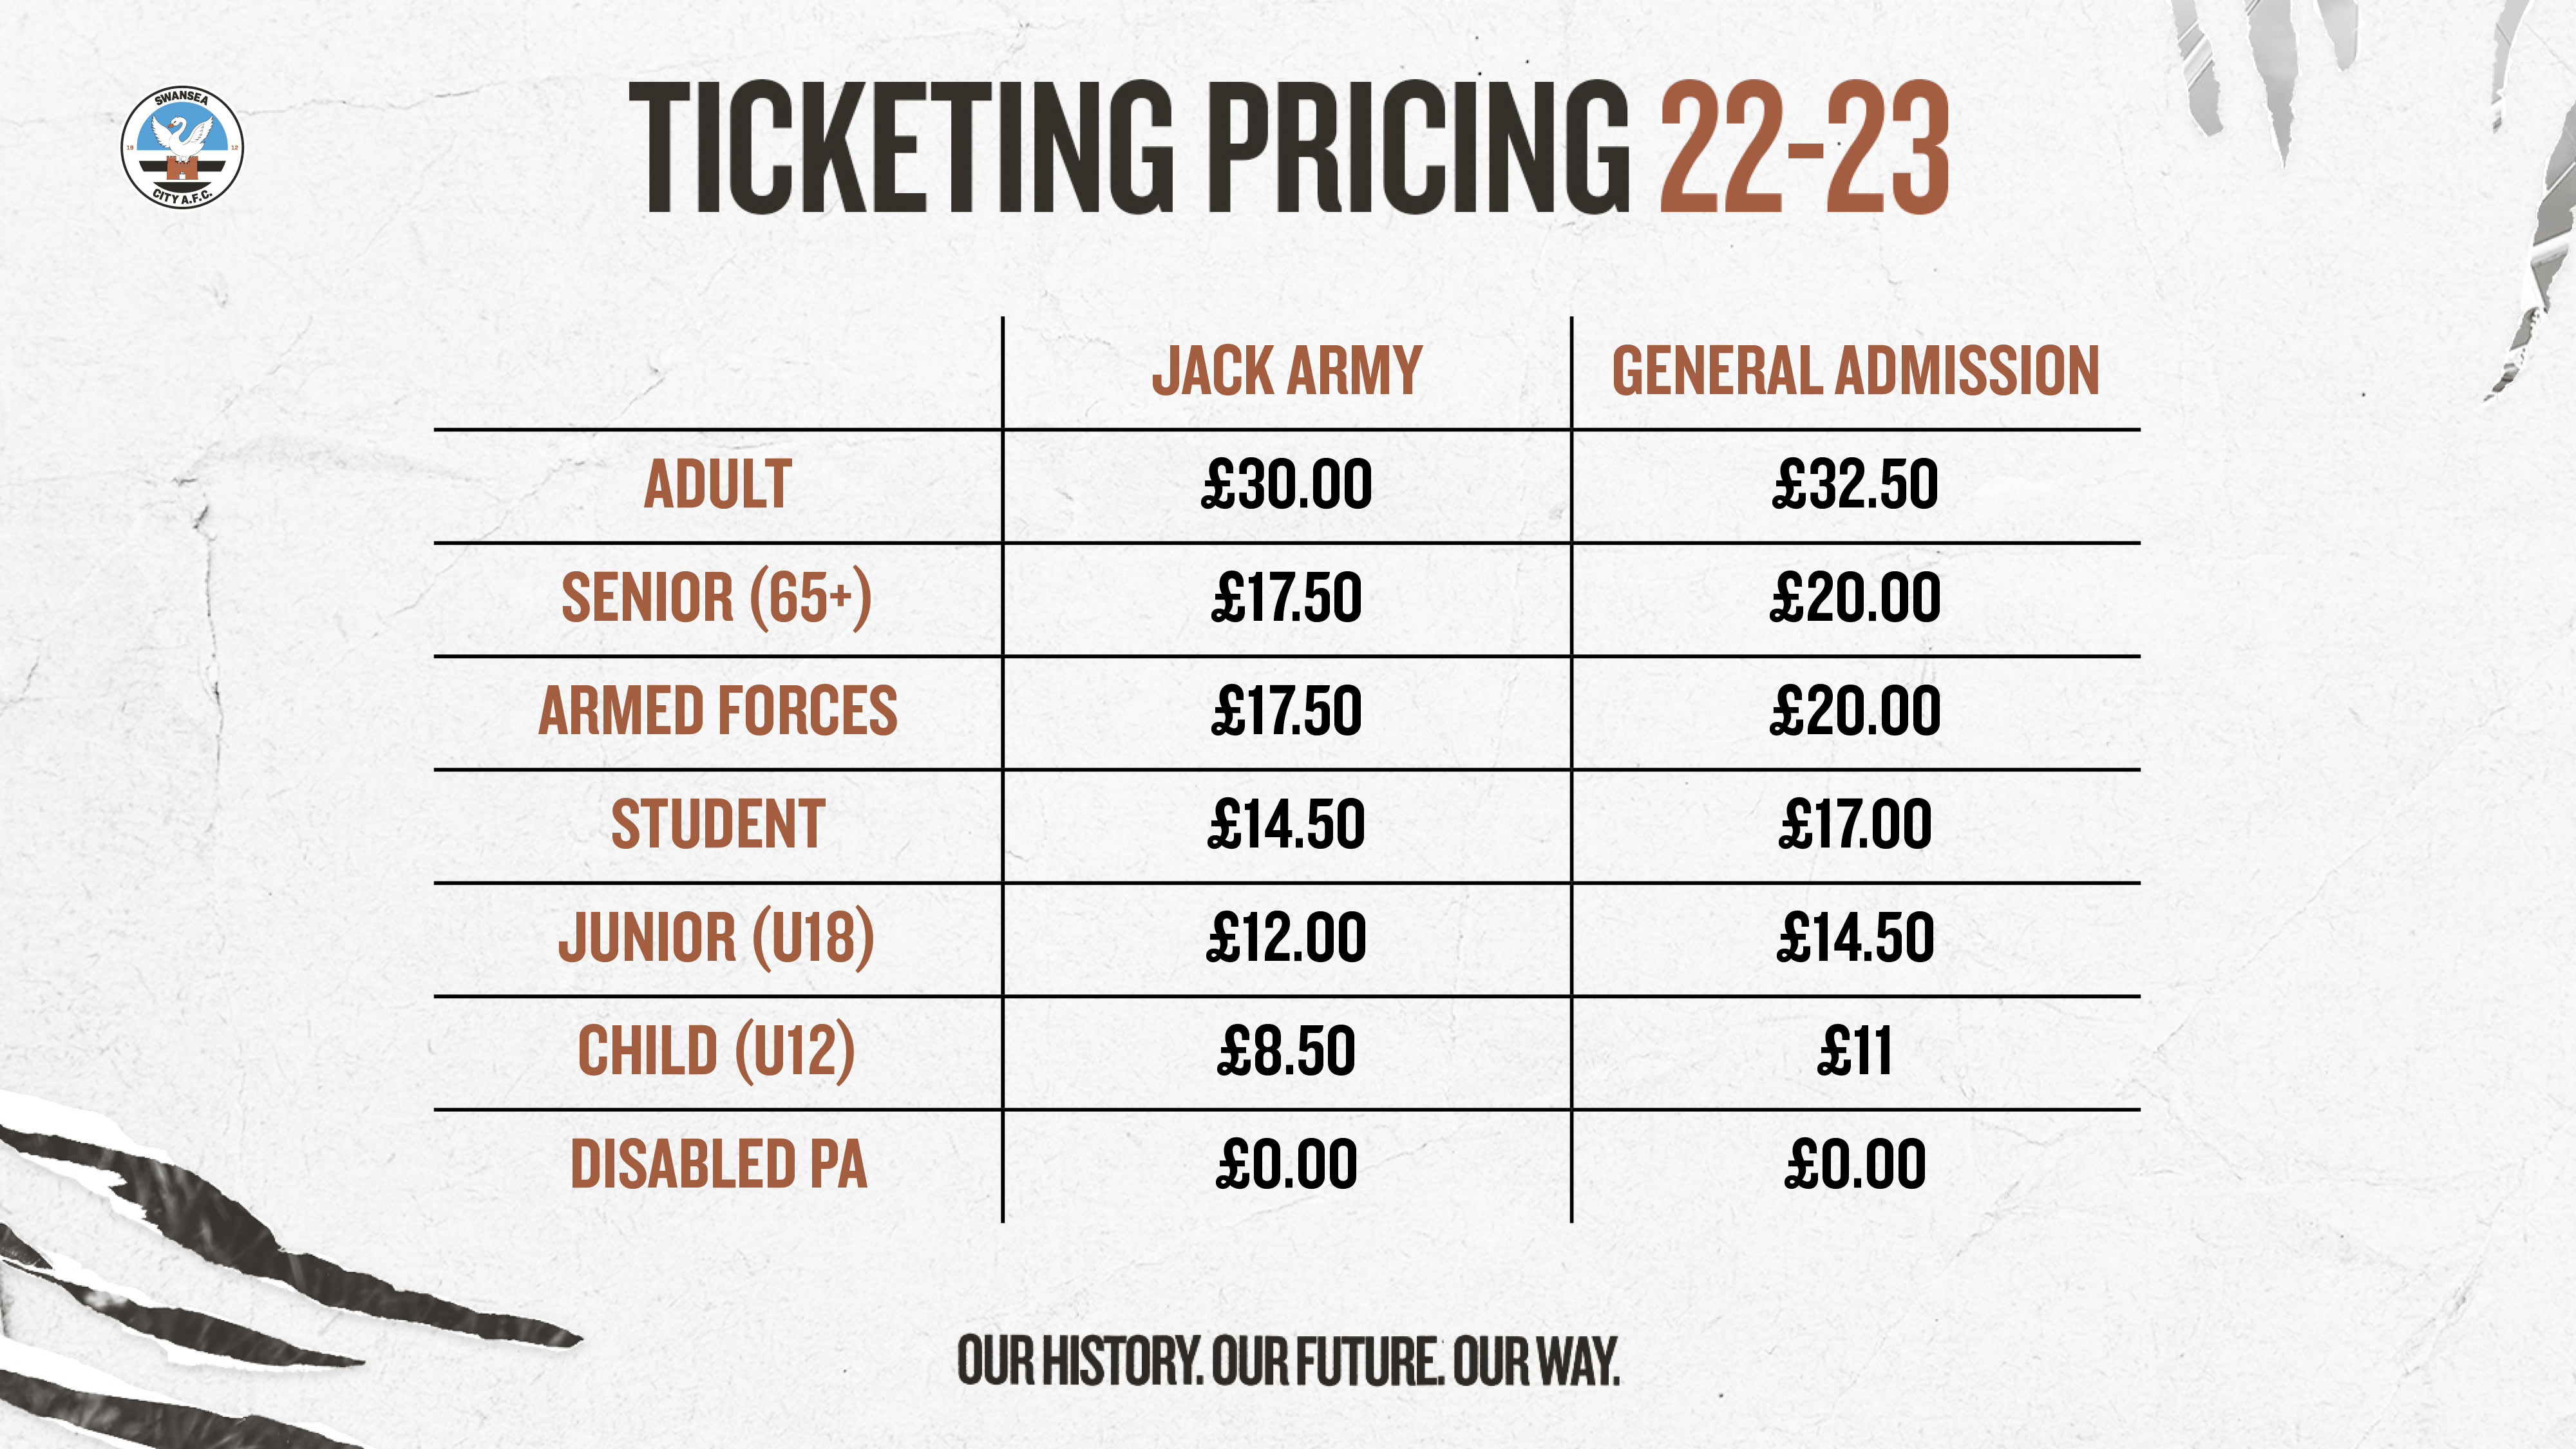 A table showing ticket prices for the 2022-23 season. Jack Army prices are as follow: Adult, £30. Senior (+65) and Armed Forces £17.50. Student £14.50. Under-18 £12. Under 12 £8.50. General admission prices are £2.50 more than Jack Army prices in the same age bracket. Disabled personal carer tickets are free of charge for both Jack Army and General Admission.